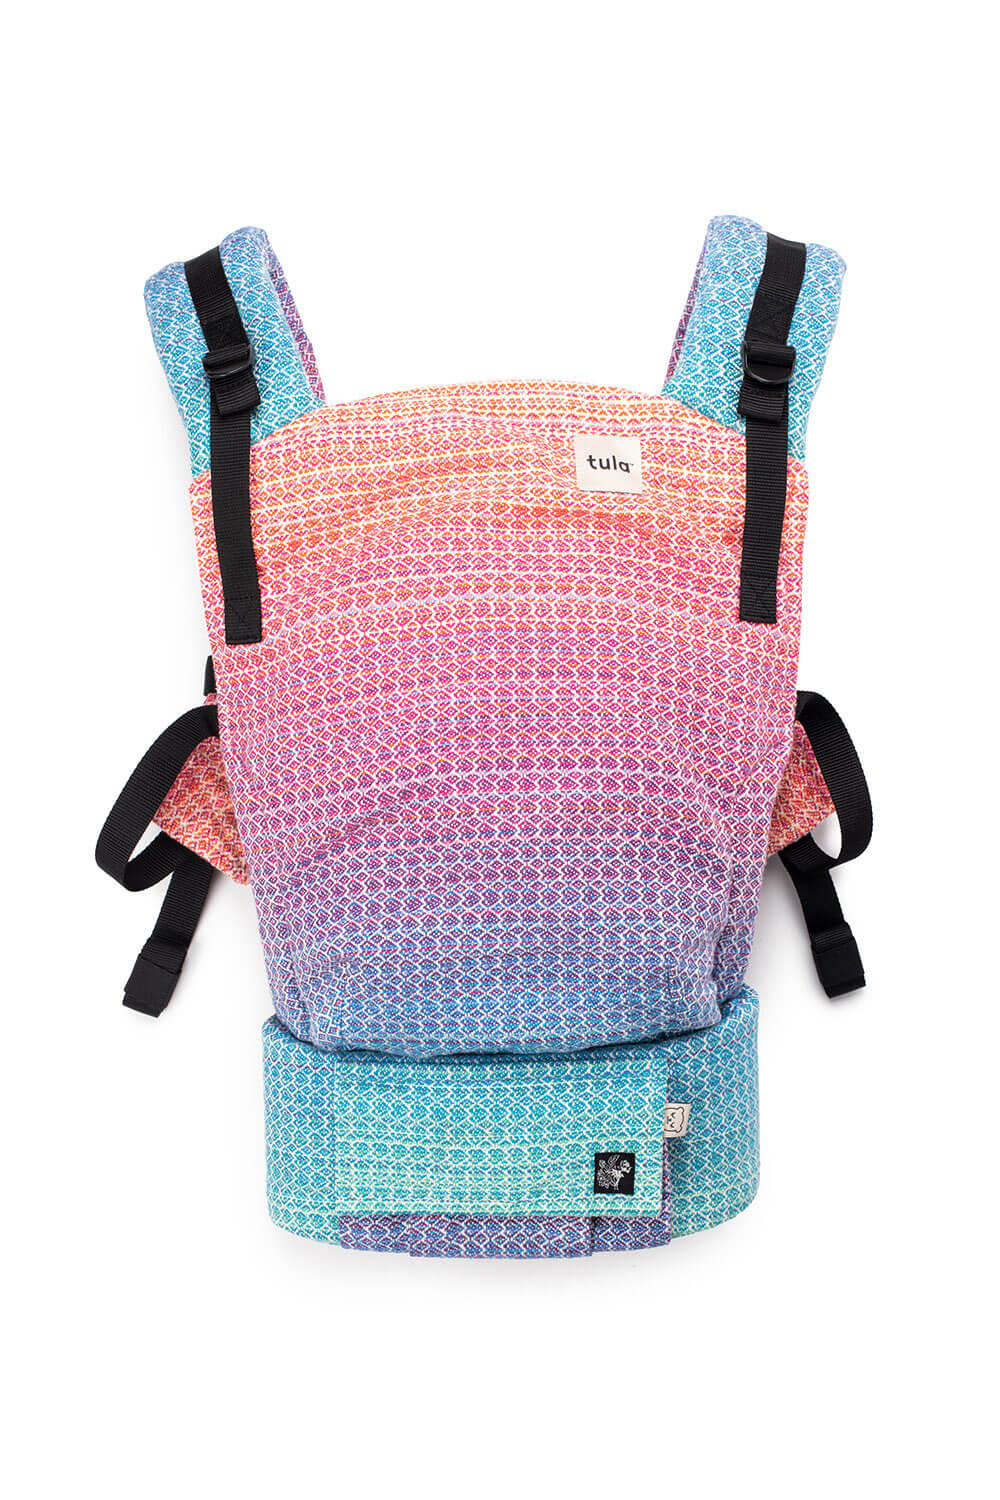 Sugar Reef - Signature Woven Free-to-Grow Baby Carrier